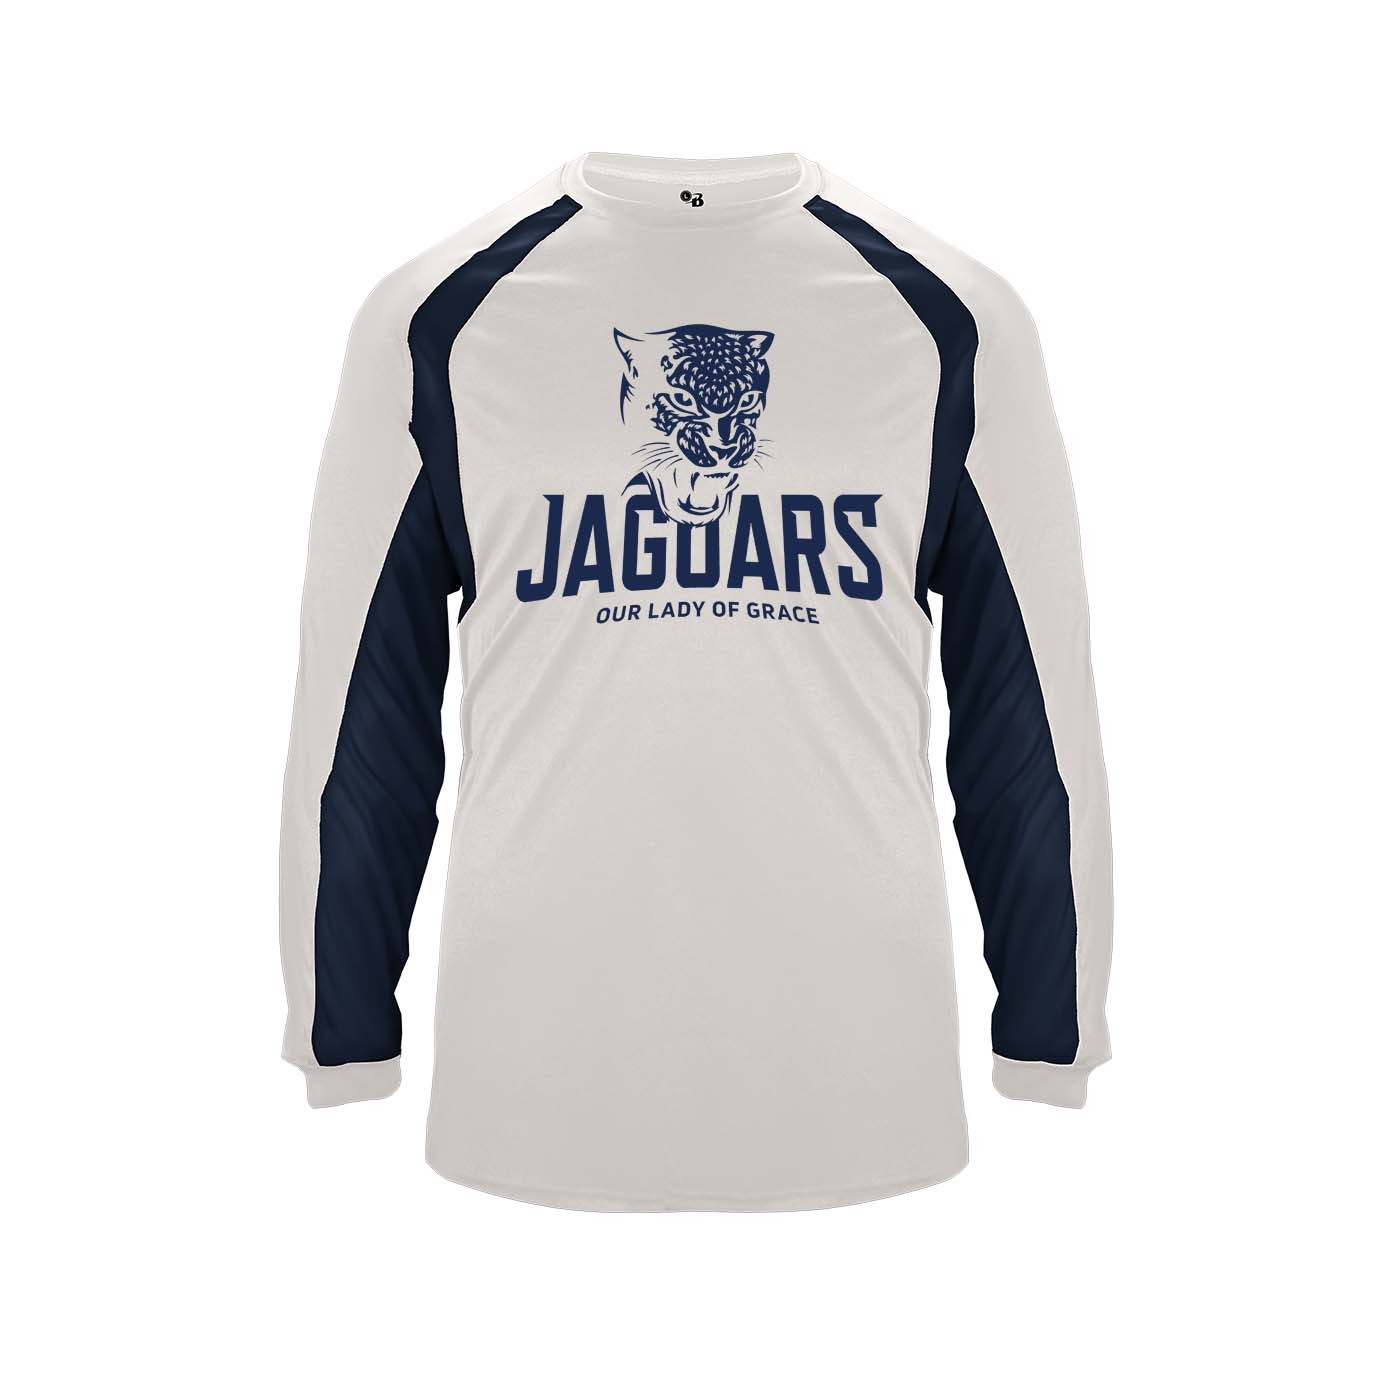 OLG Spirit Hook L/S T-Shirt w/ Navy Logo - Please Allow 2-3 Weeks for Delivery